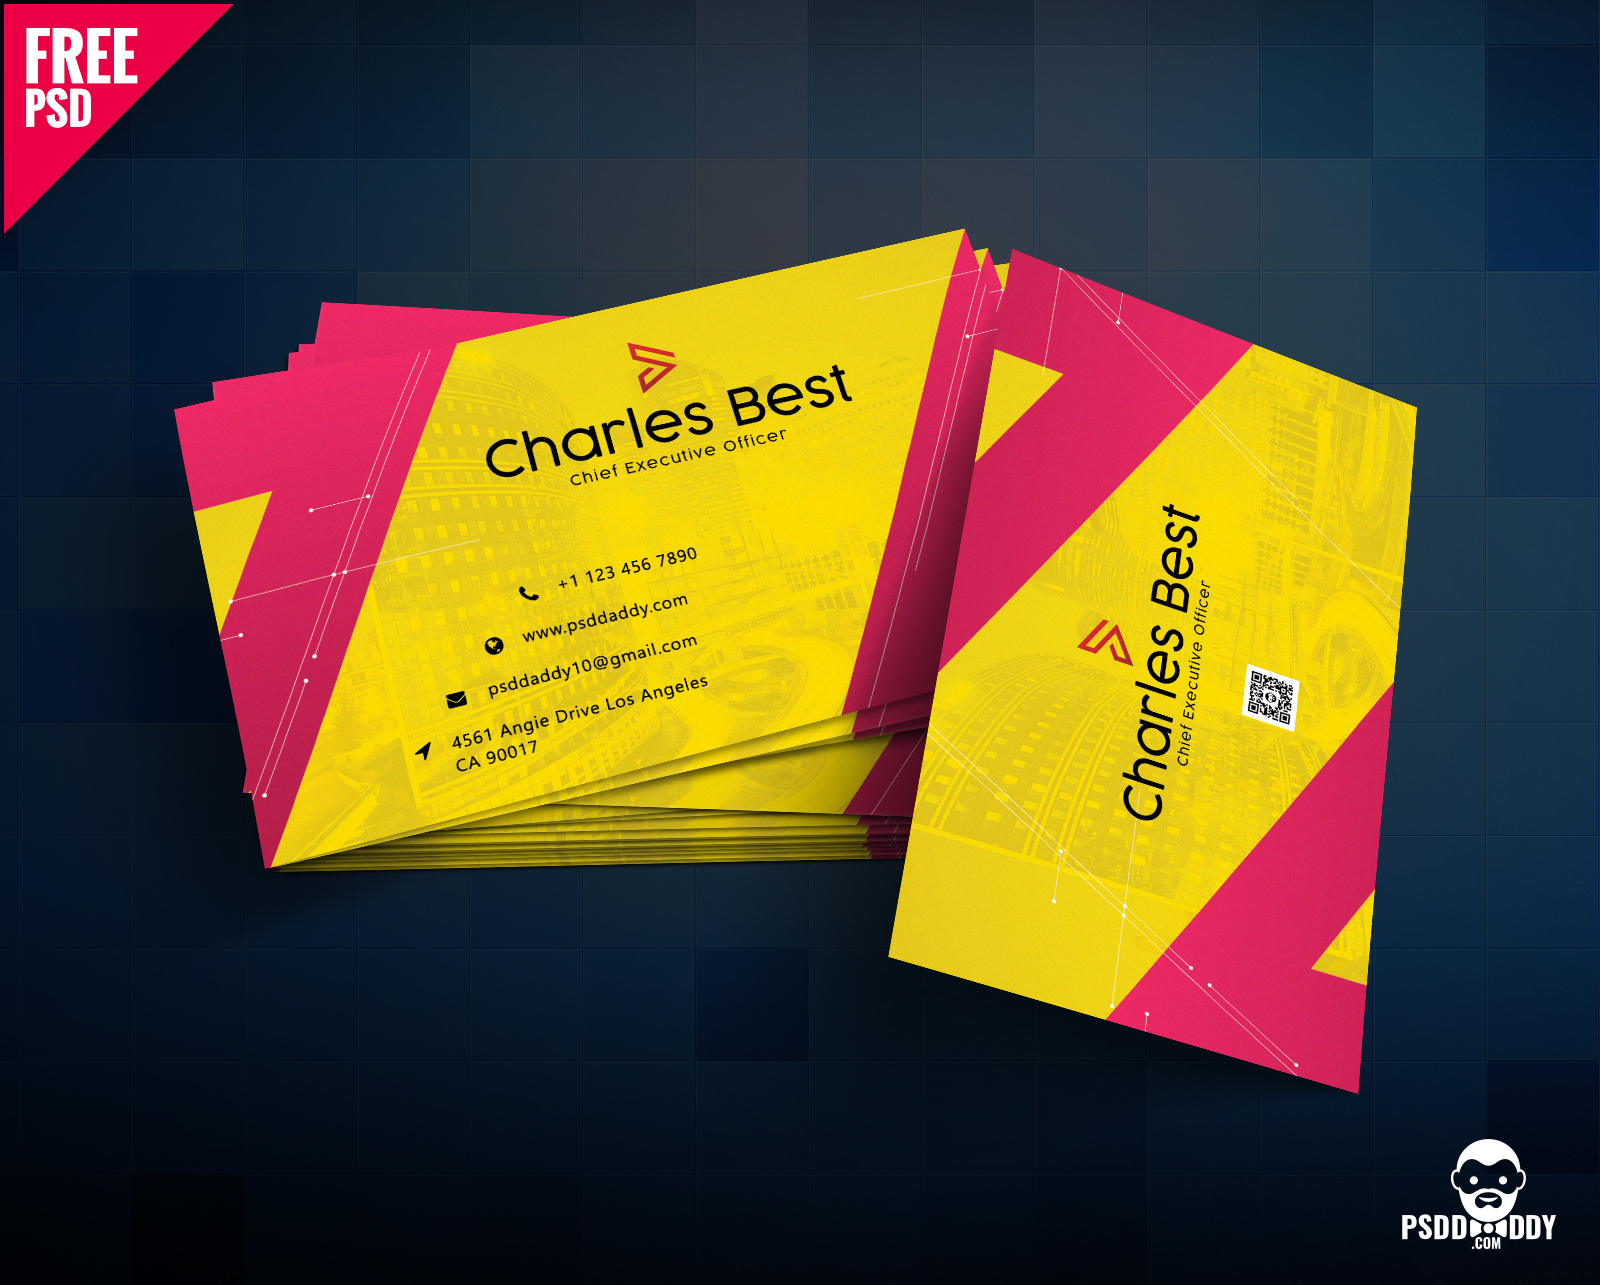 Download] Creative Business Card Free Psd | Psddaddy Intended For Business Card Size Psd Template